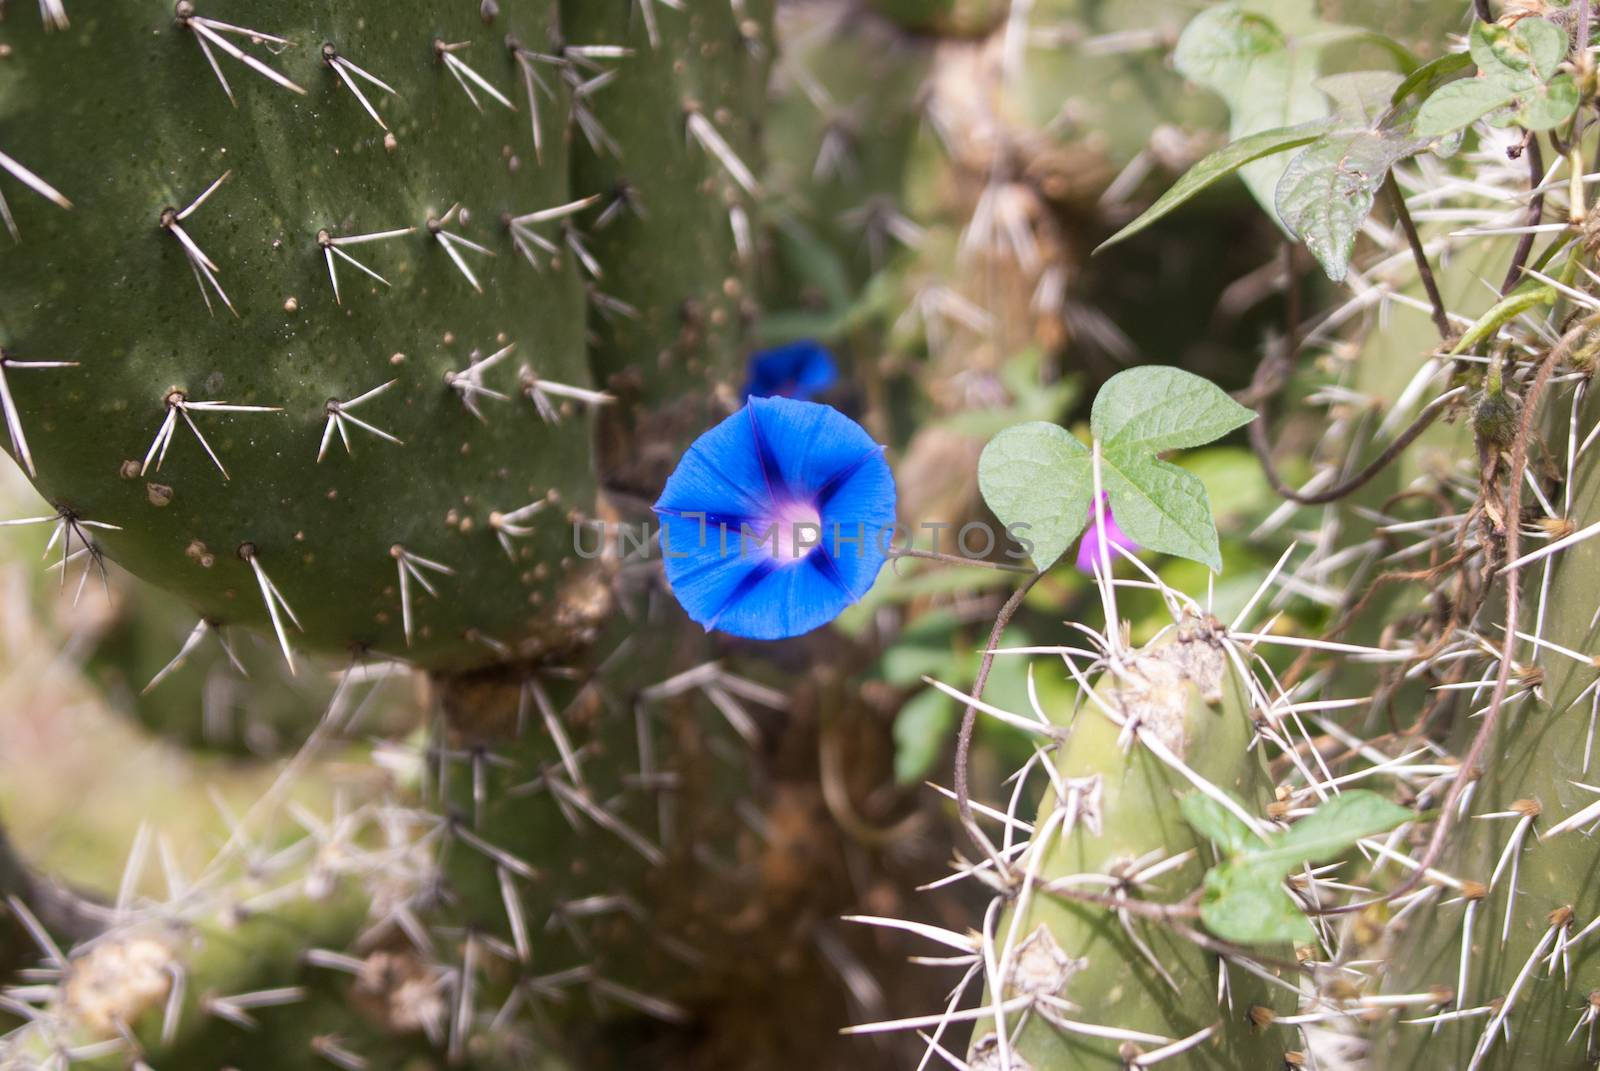 Blue flower survives in among thorny cactus